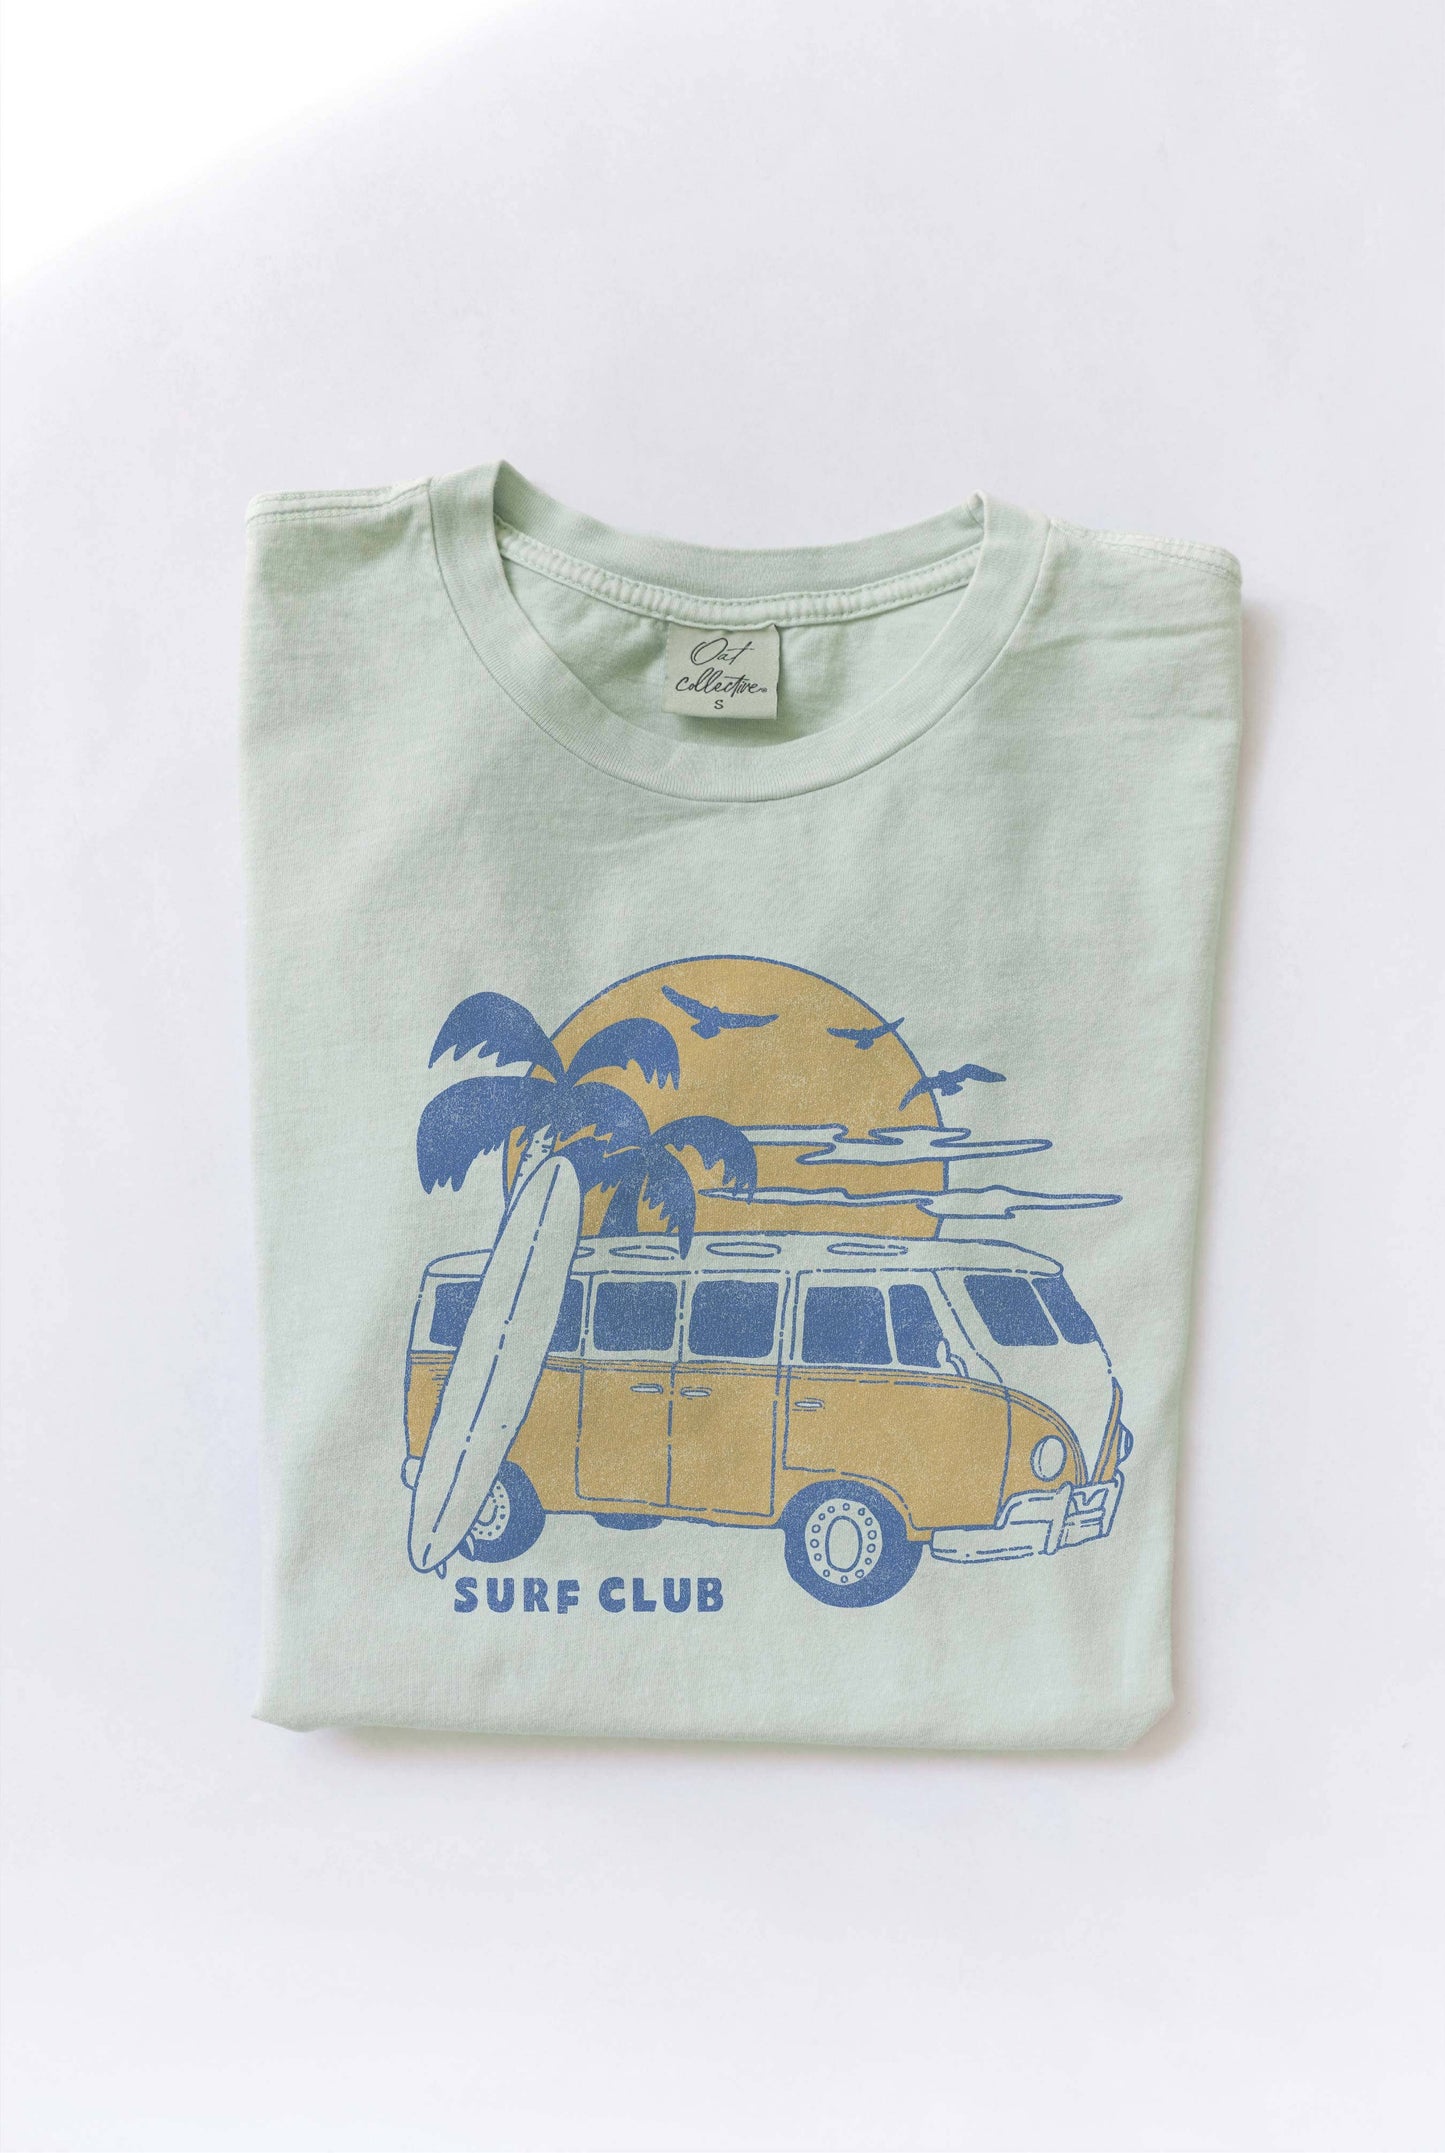 SURF CLUB Mineral Washed Tee